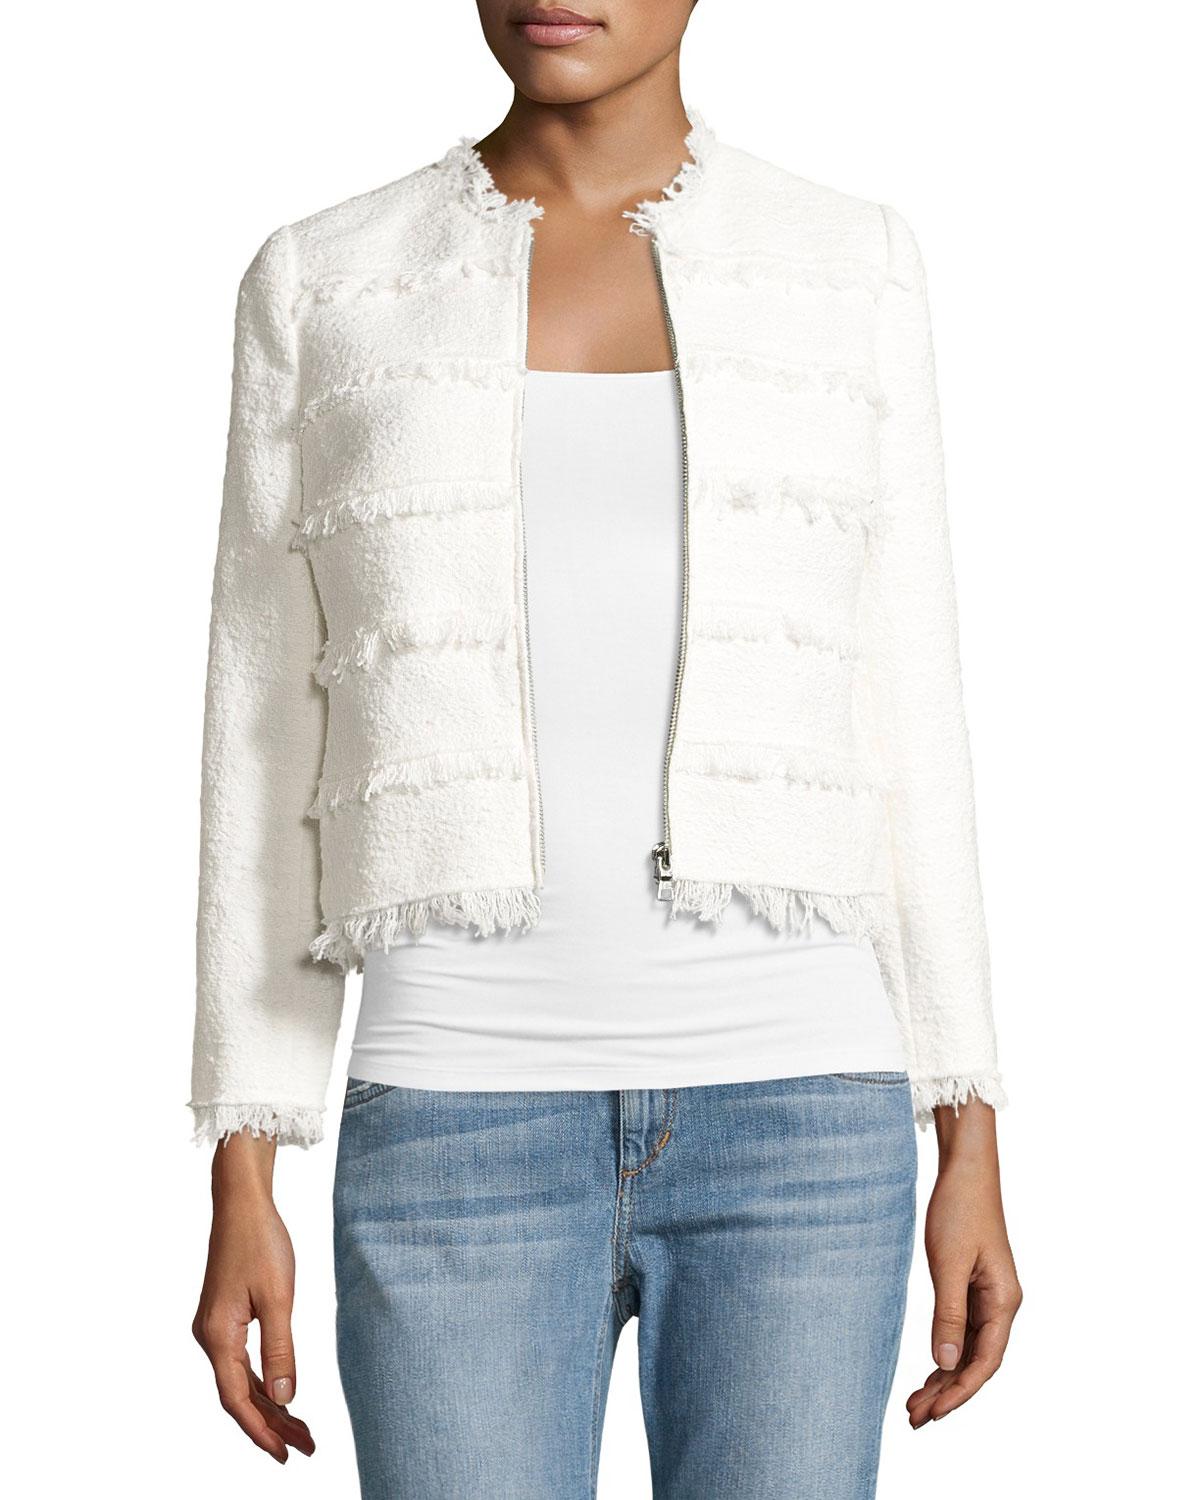 Lyst - Rebecca Taylor Textured Tweed Jacket With Fringe in White